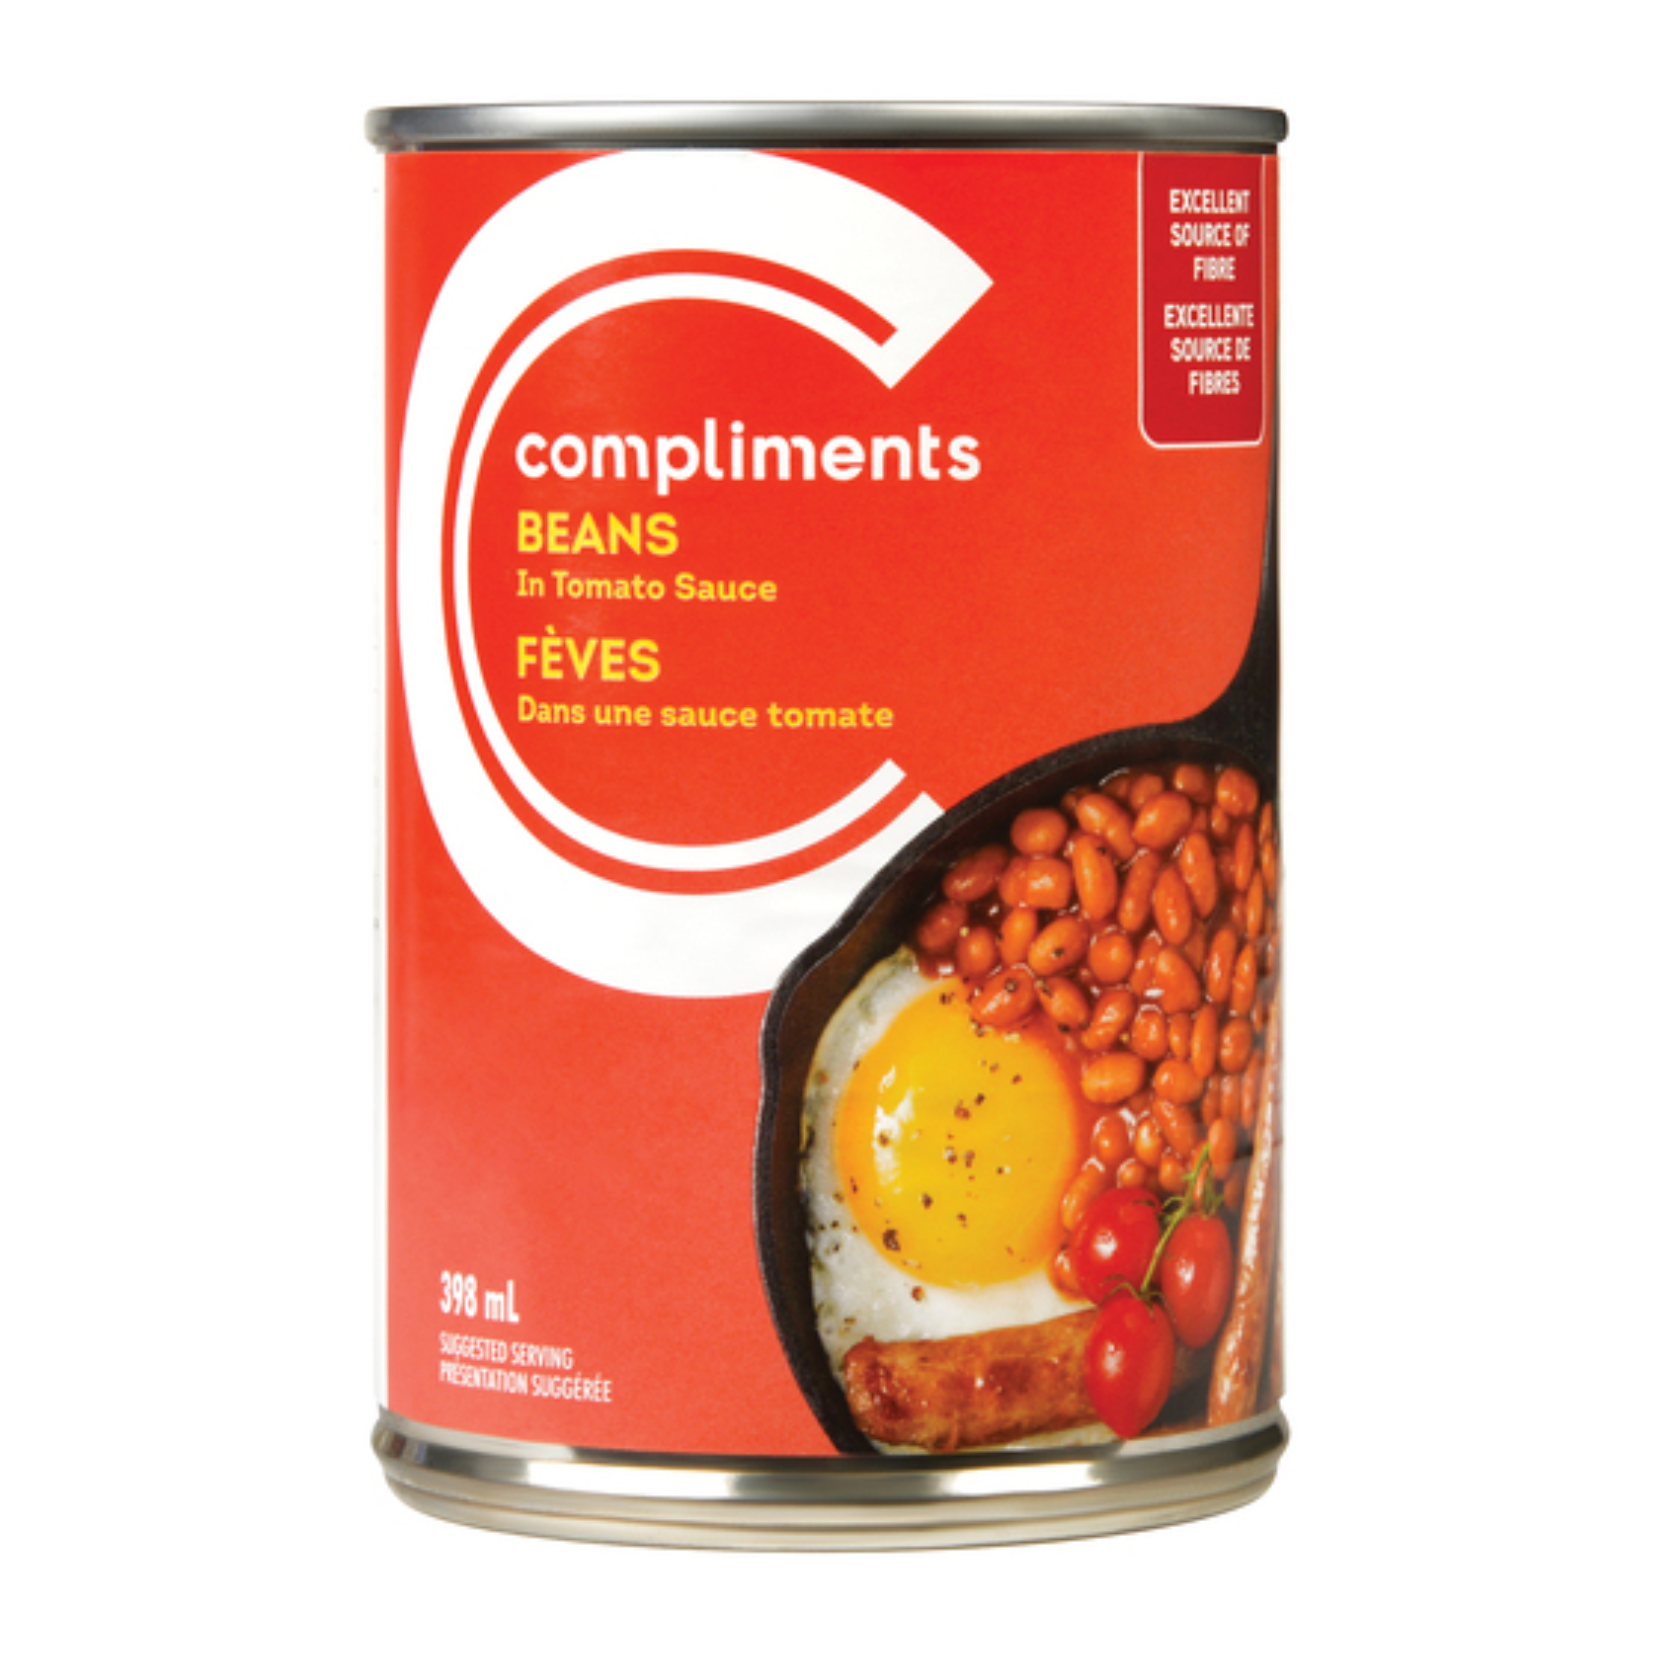 Compliments Tomato Sauce Beans 398ml